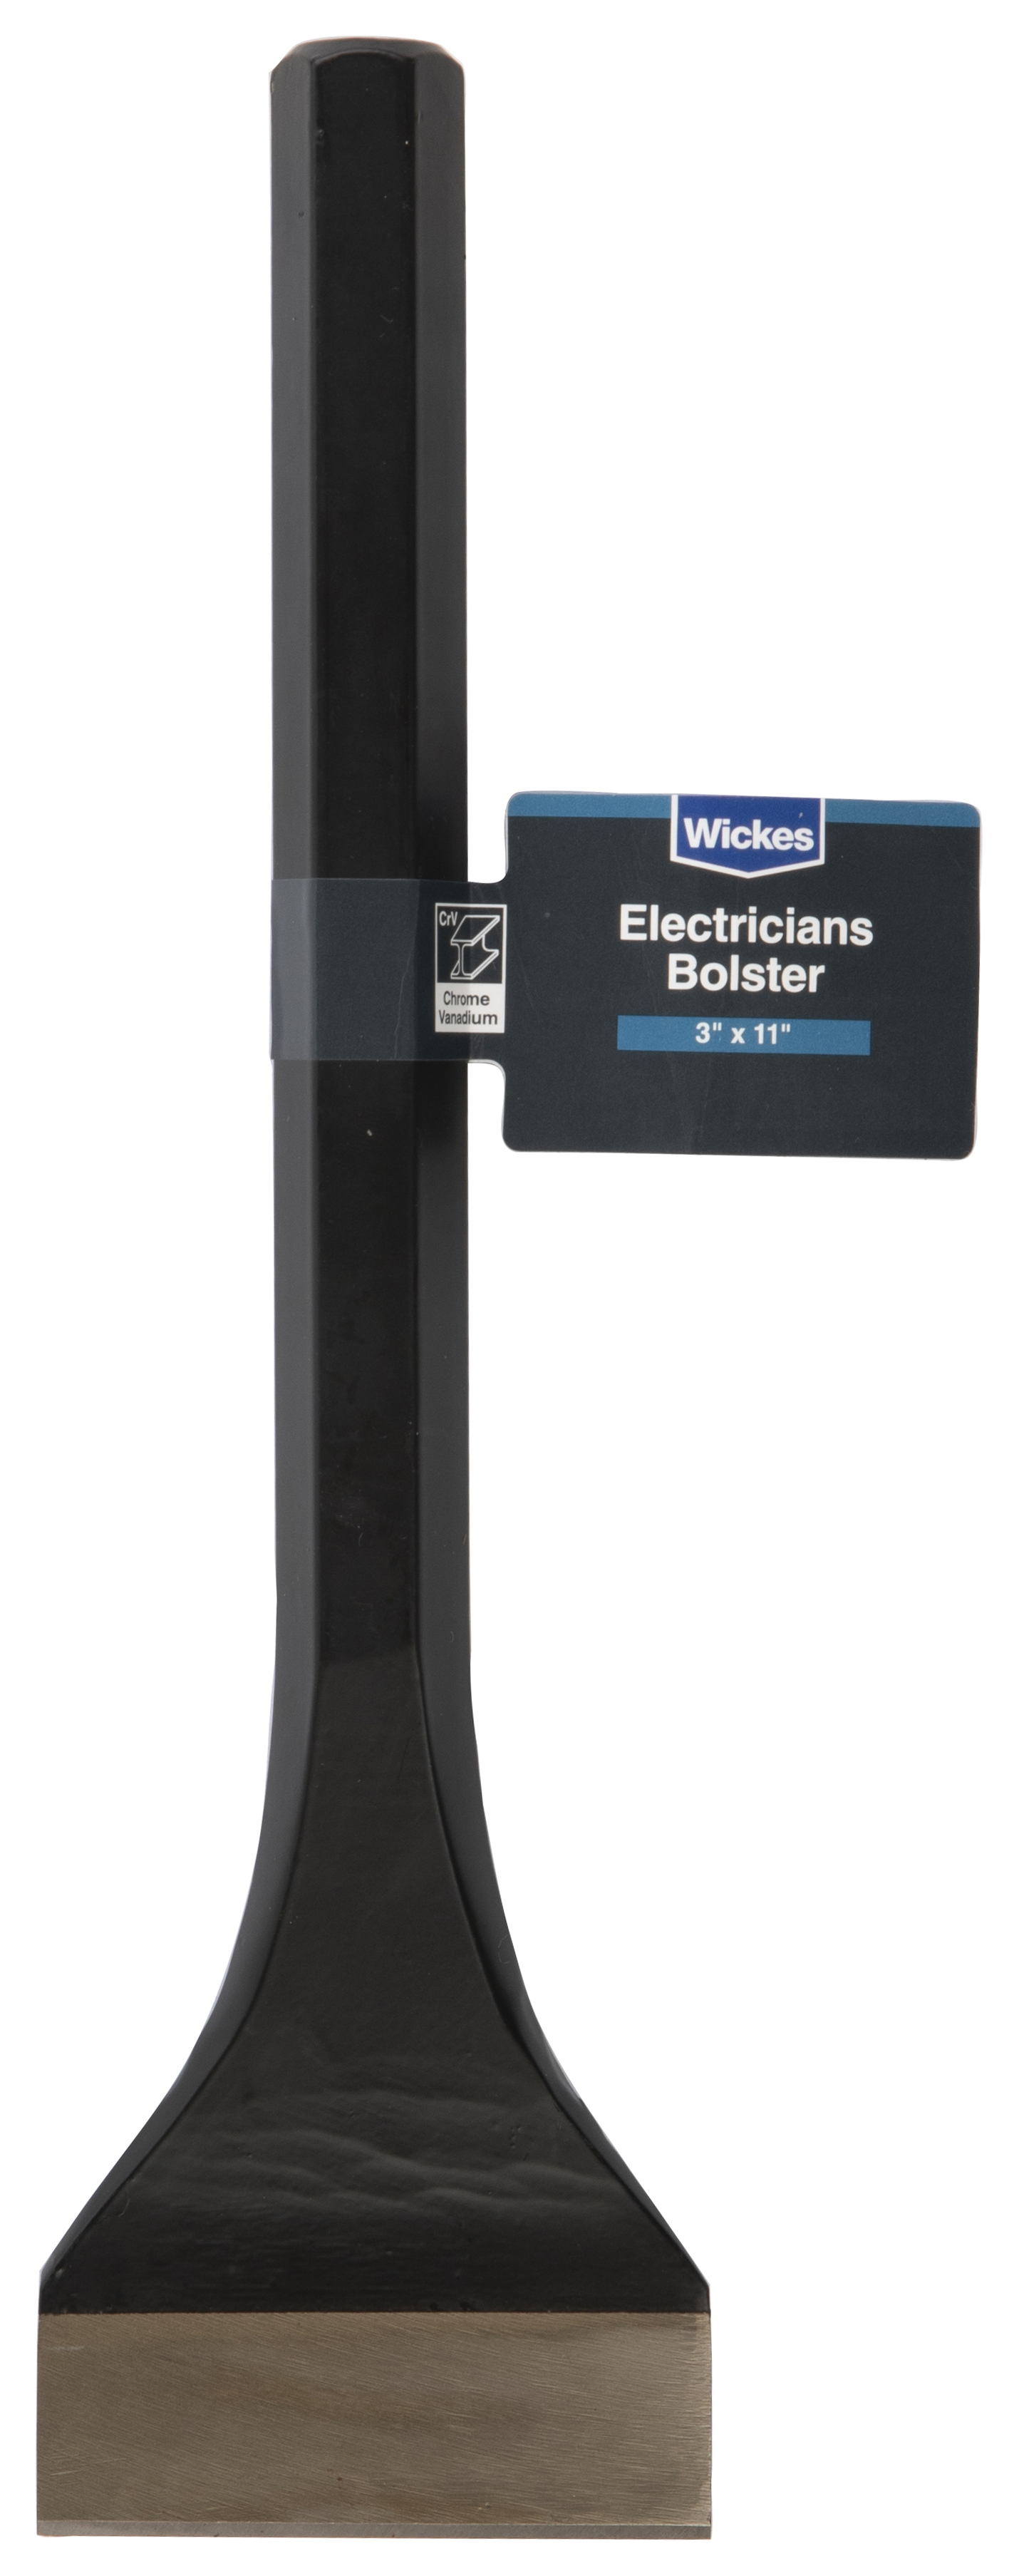 Image of Wickes Electricians Bolster 3" x 11"